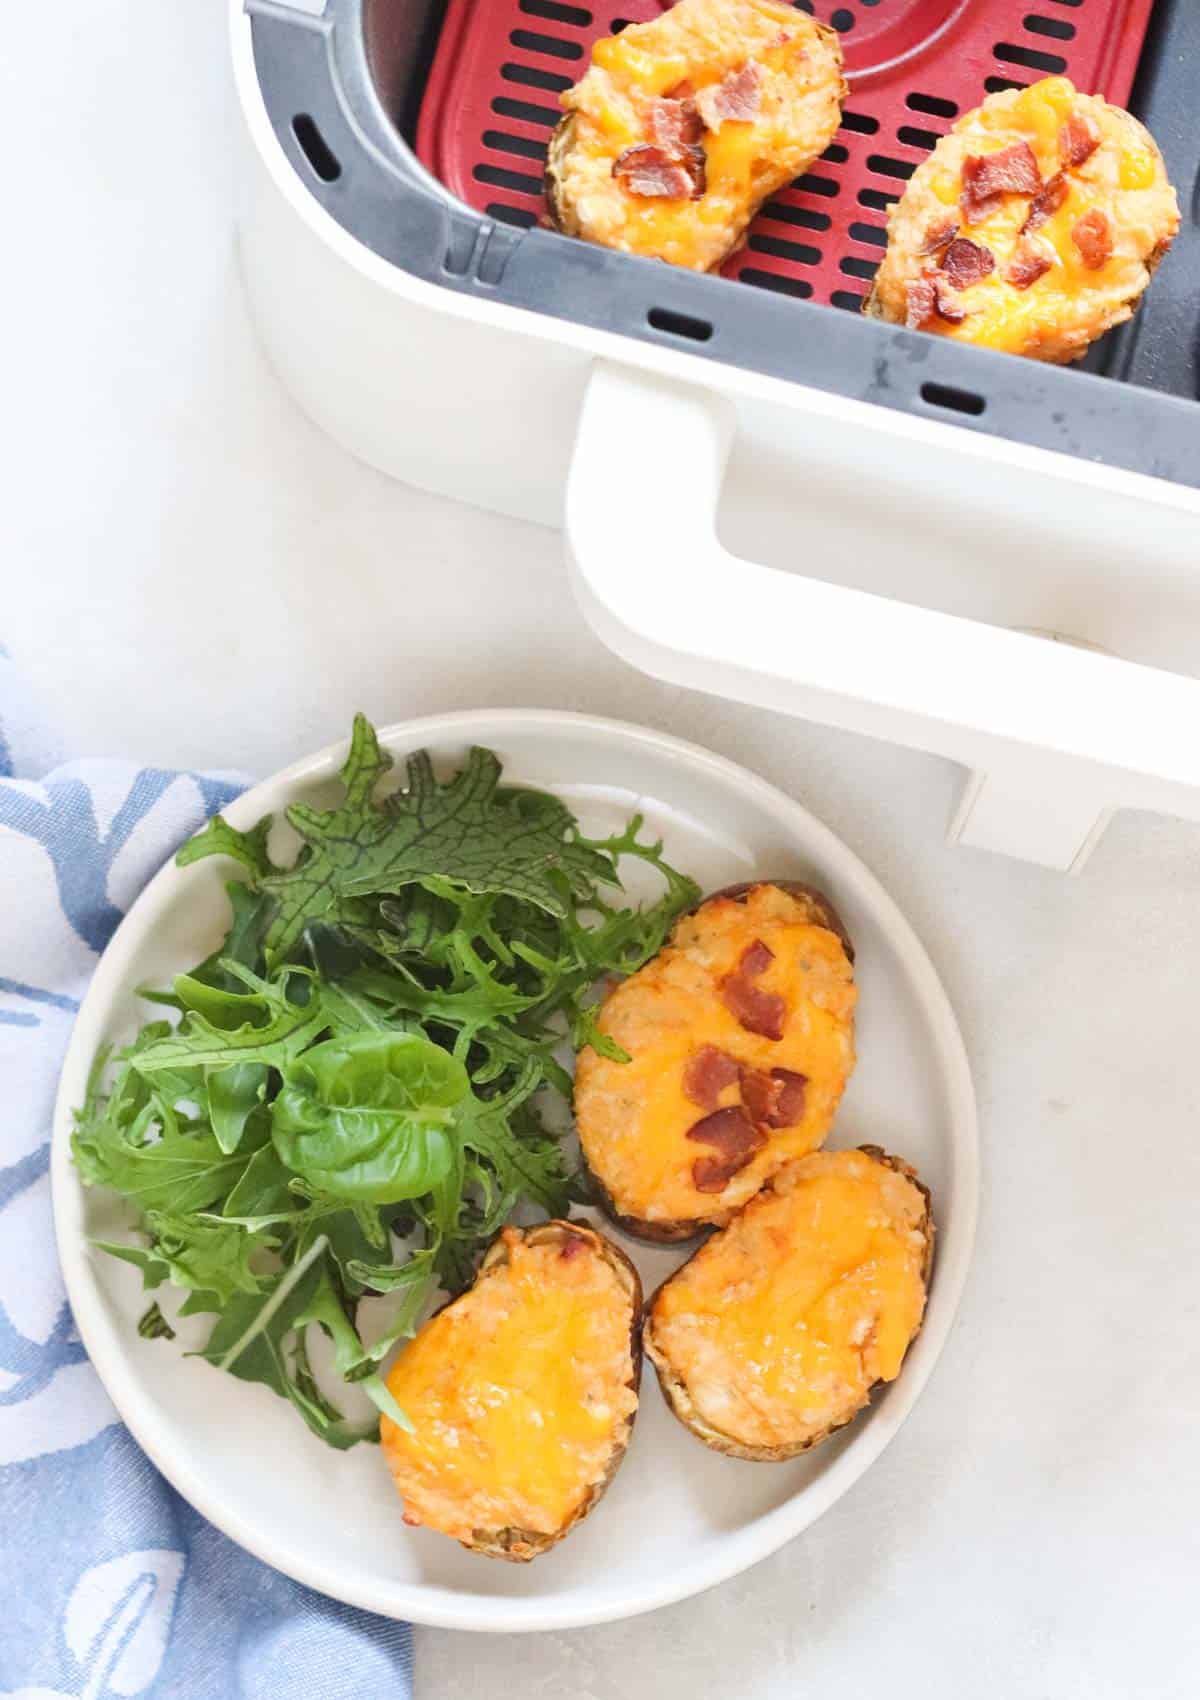 twice baked potatoes and a salad on a plate next to an air fryer basket with more twice baked potatoes